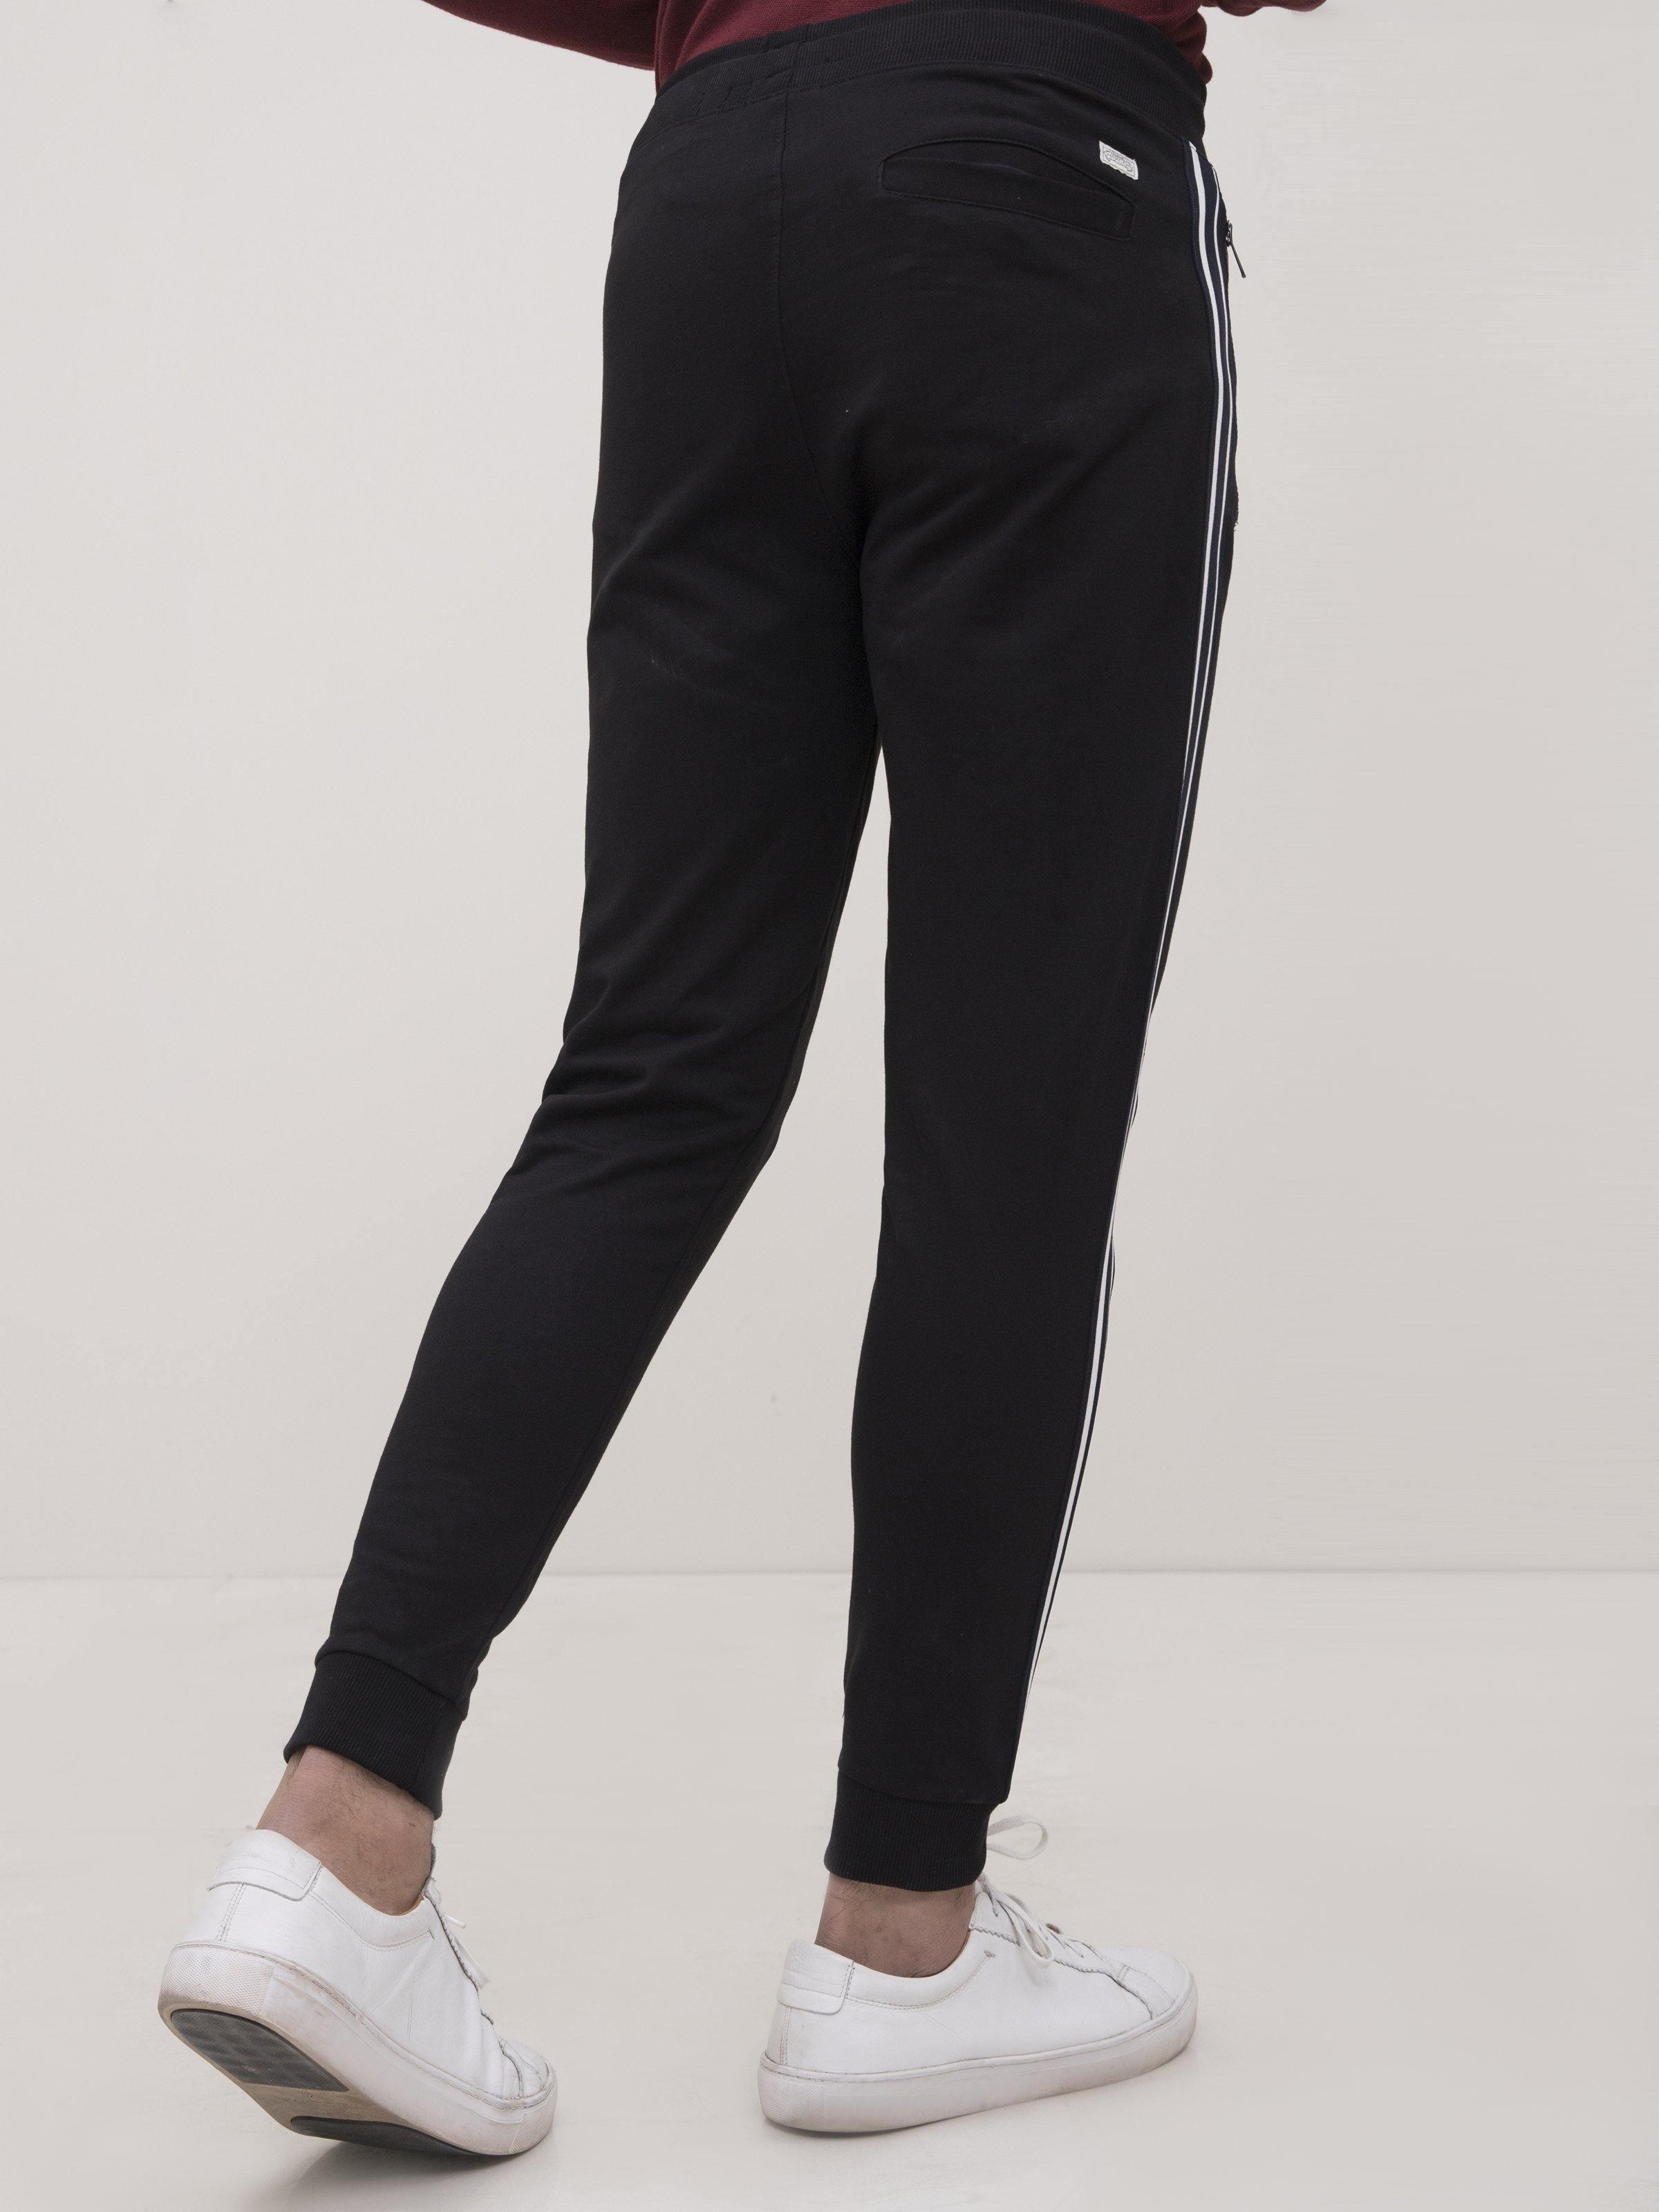 TERRY SIDE TAPE TROUSER BLACK at Charcoal Clothing